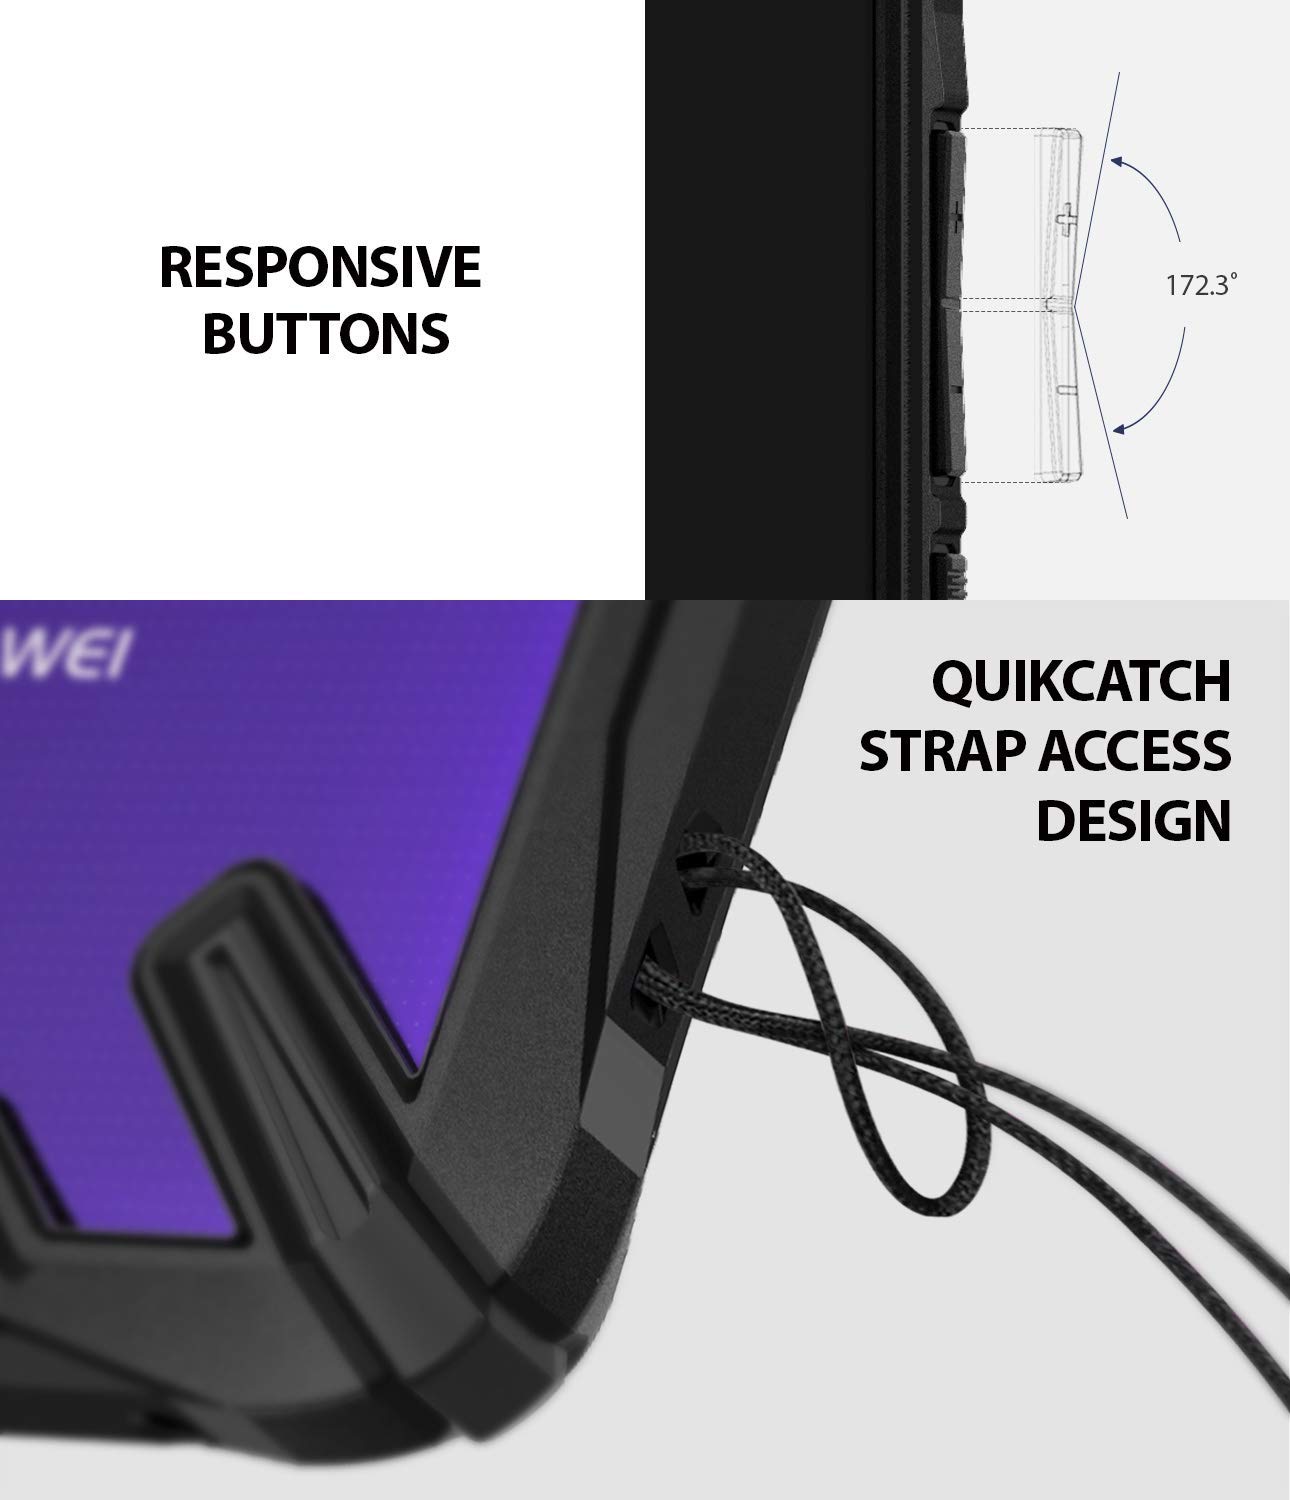 responsive buttons with quikcatch lanyard hole to attach additional accessories